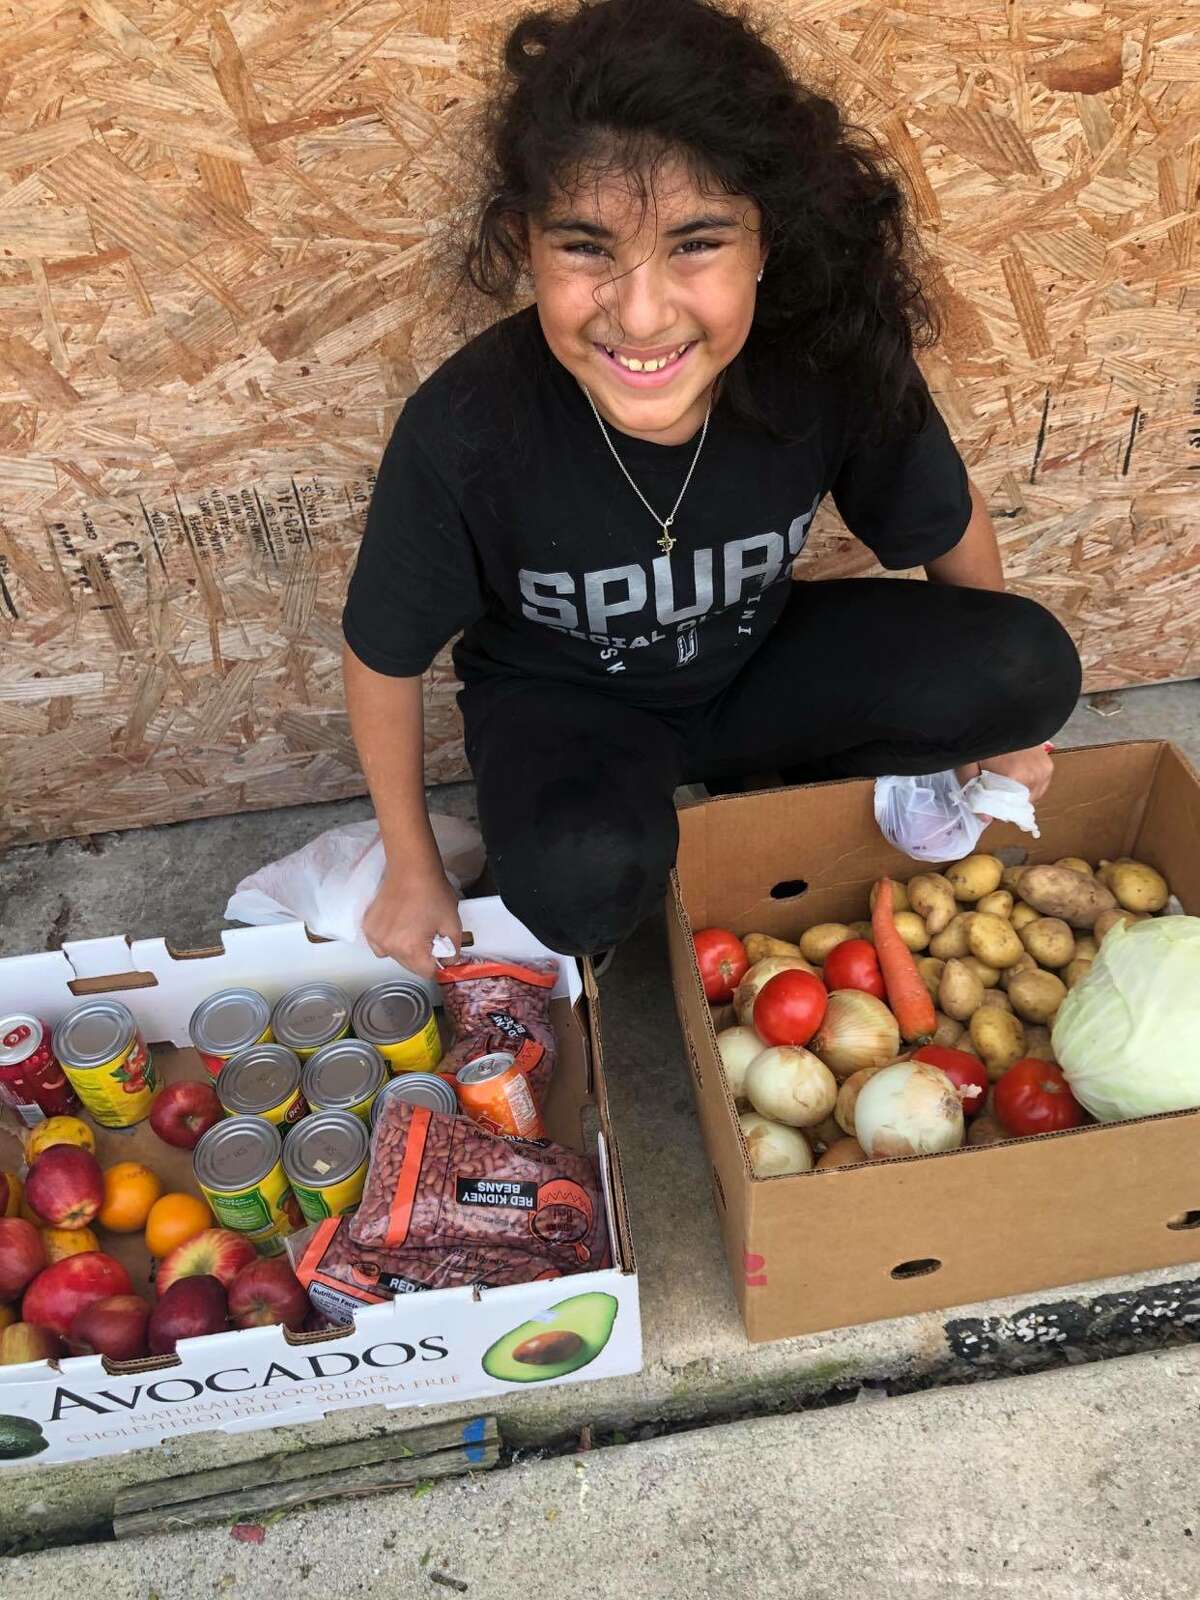 There's a new free neighborhood food pantry on the West Side organized by a 10-year-old girl named Aeris McLeland.